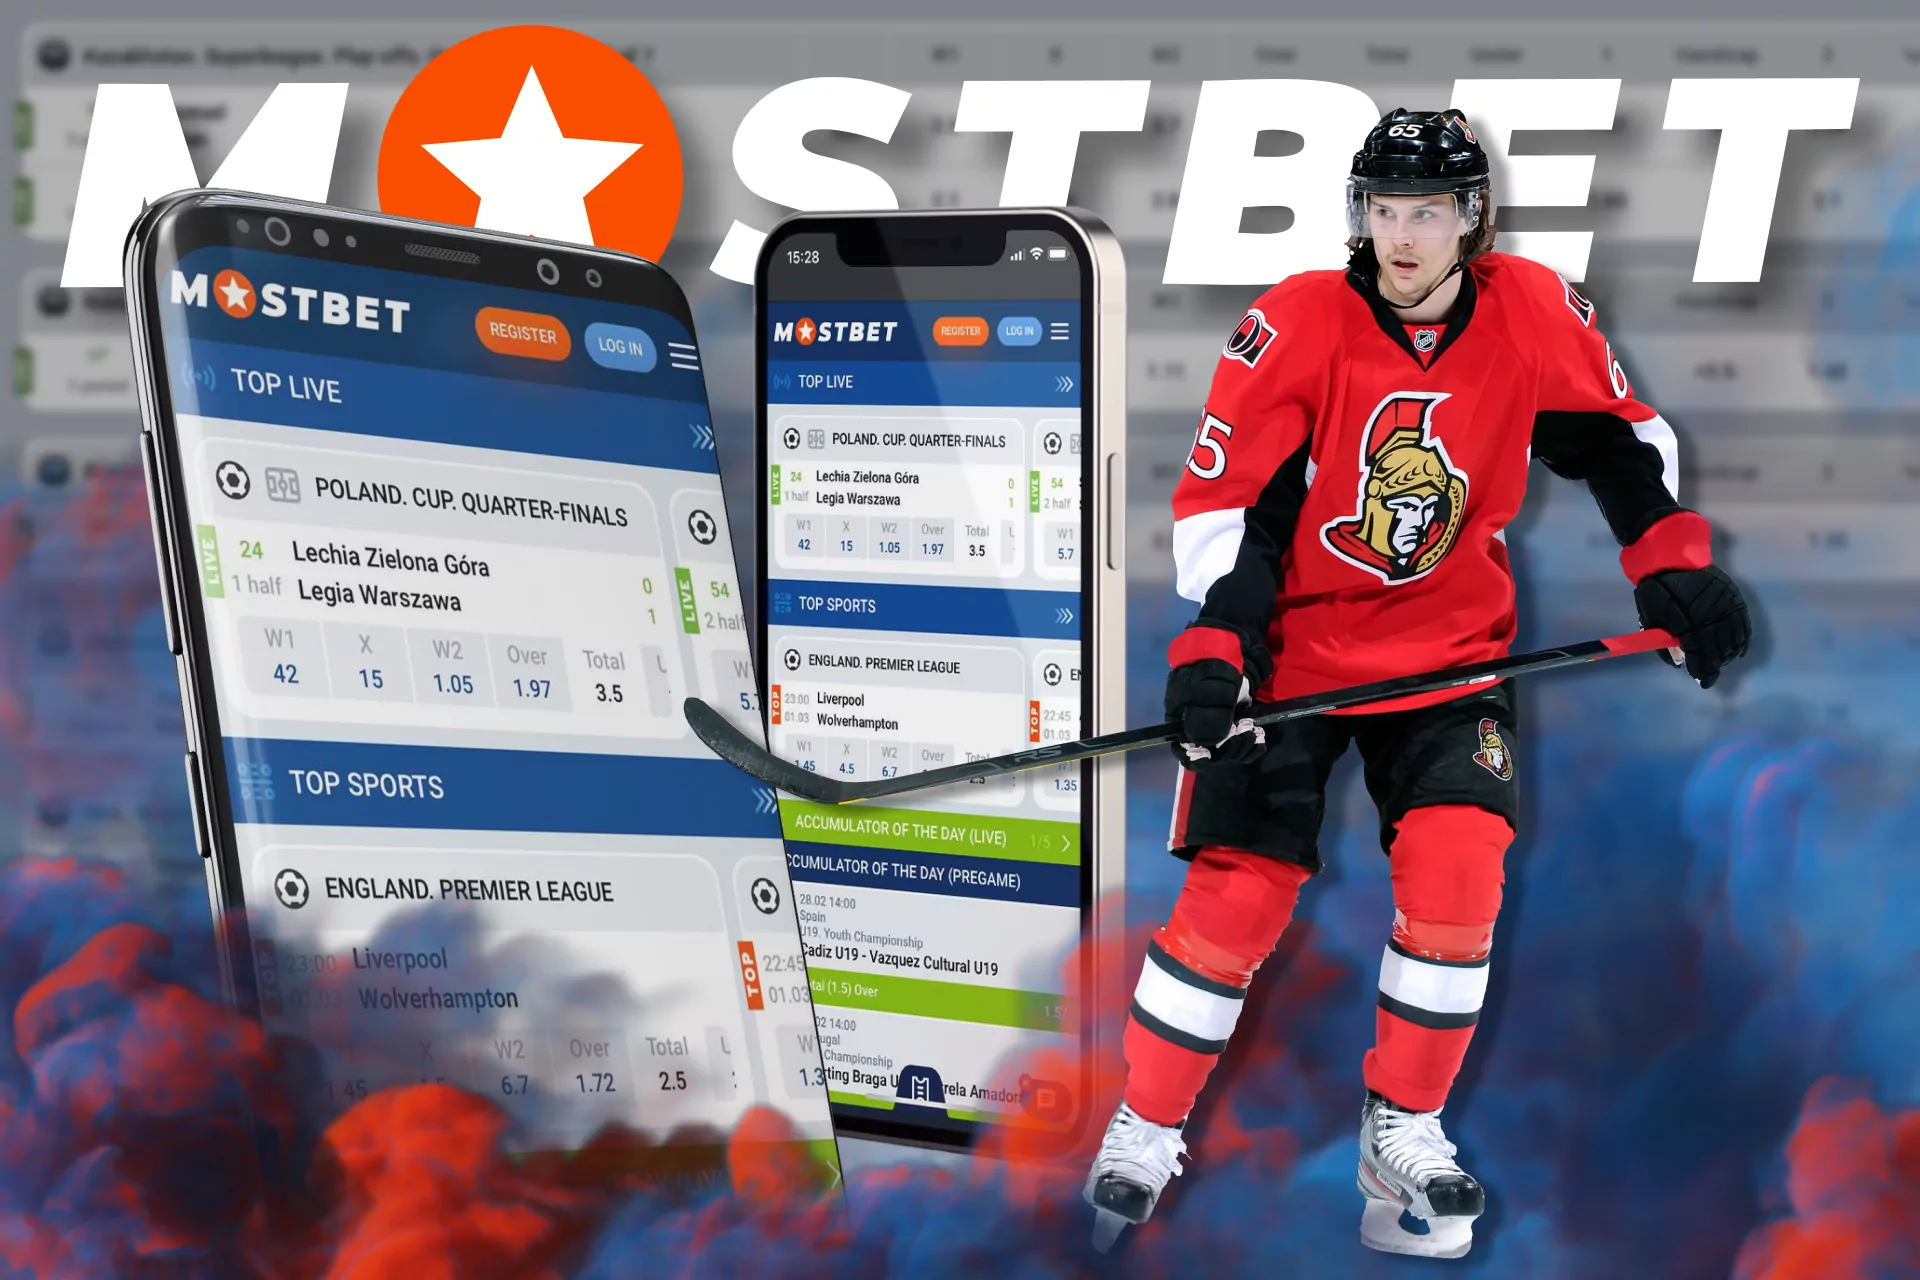 You can bet on ice hockey on Mostbet from the mobile app on your phone.